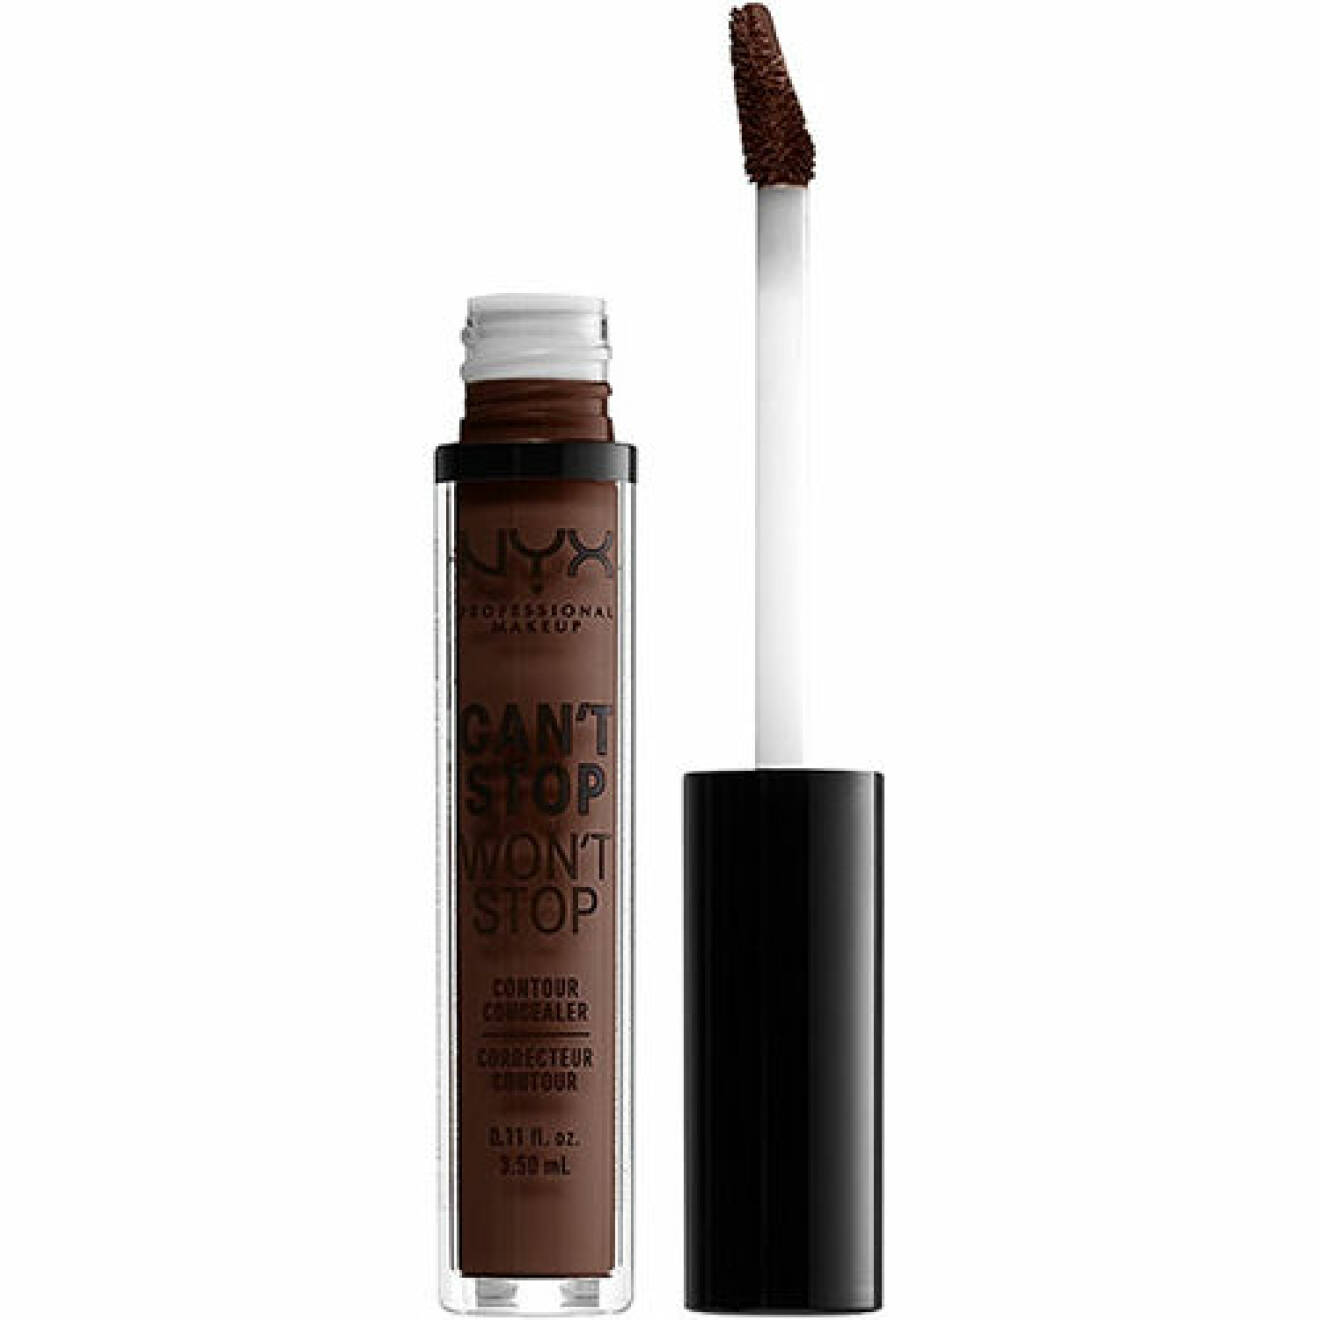 Cant stop wont stop concealer från NYX